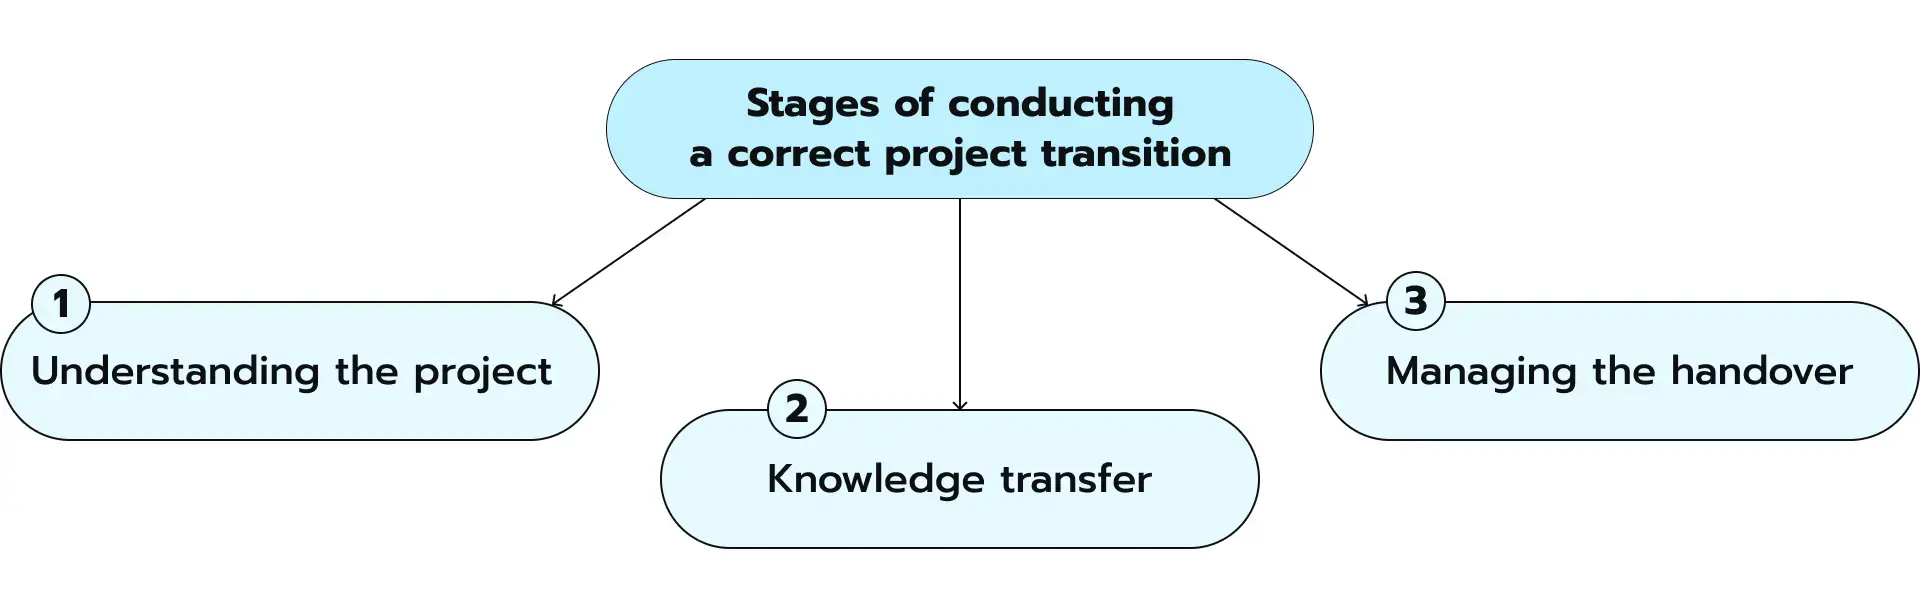 Stages of conducting a correct project transition